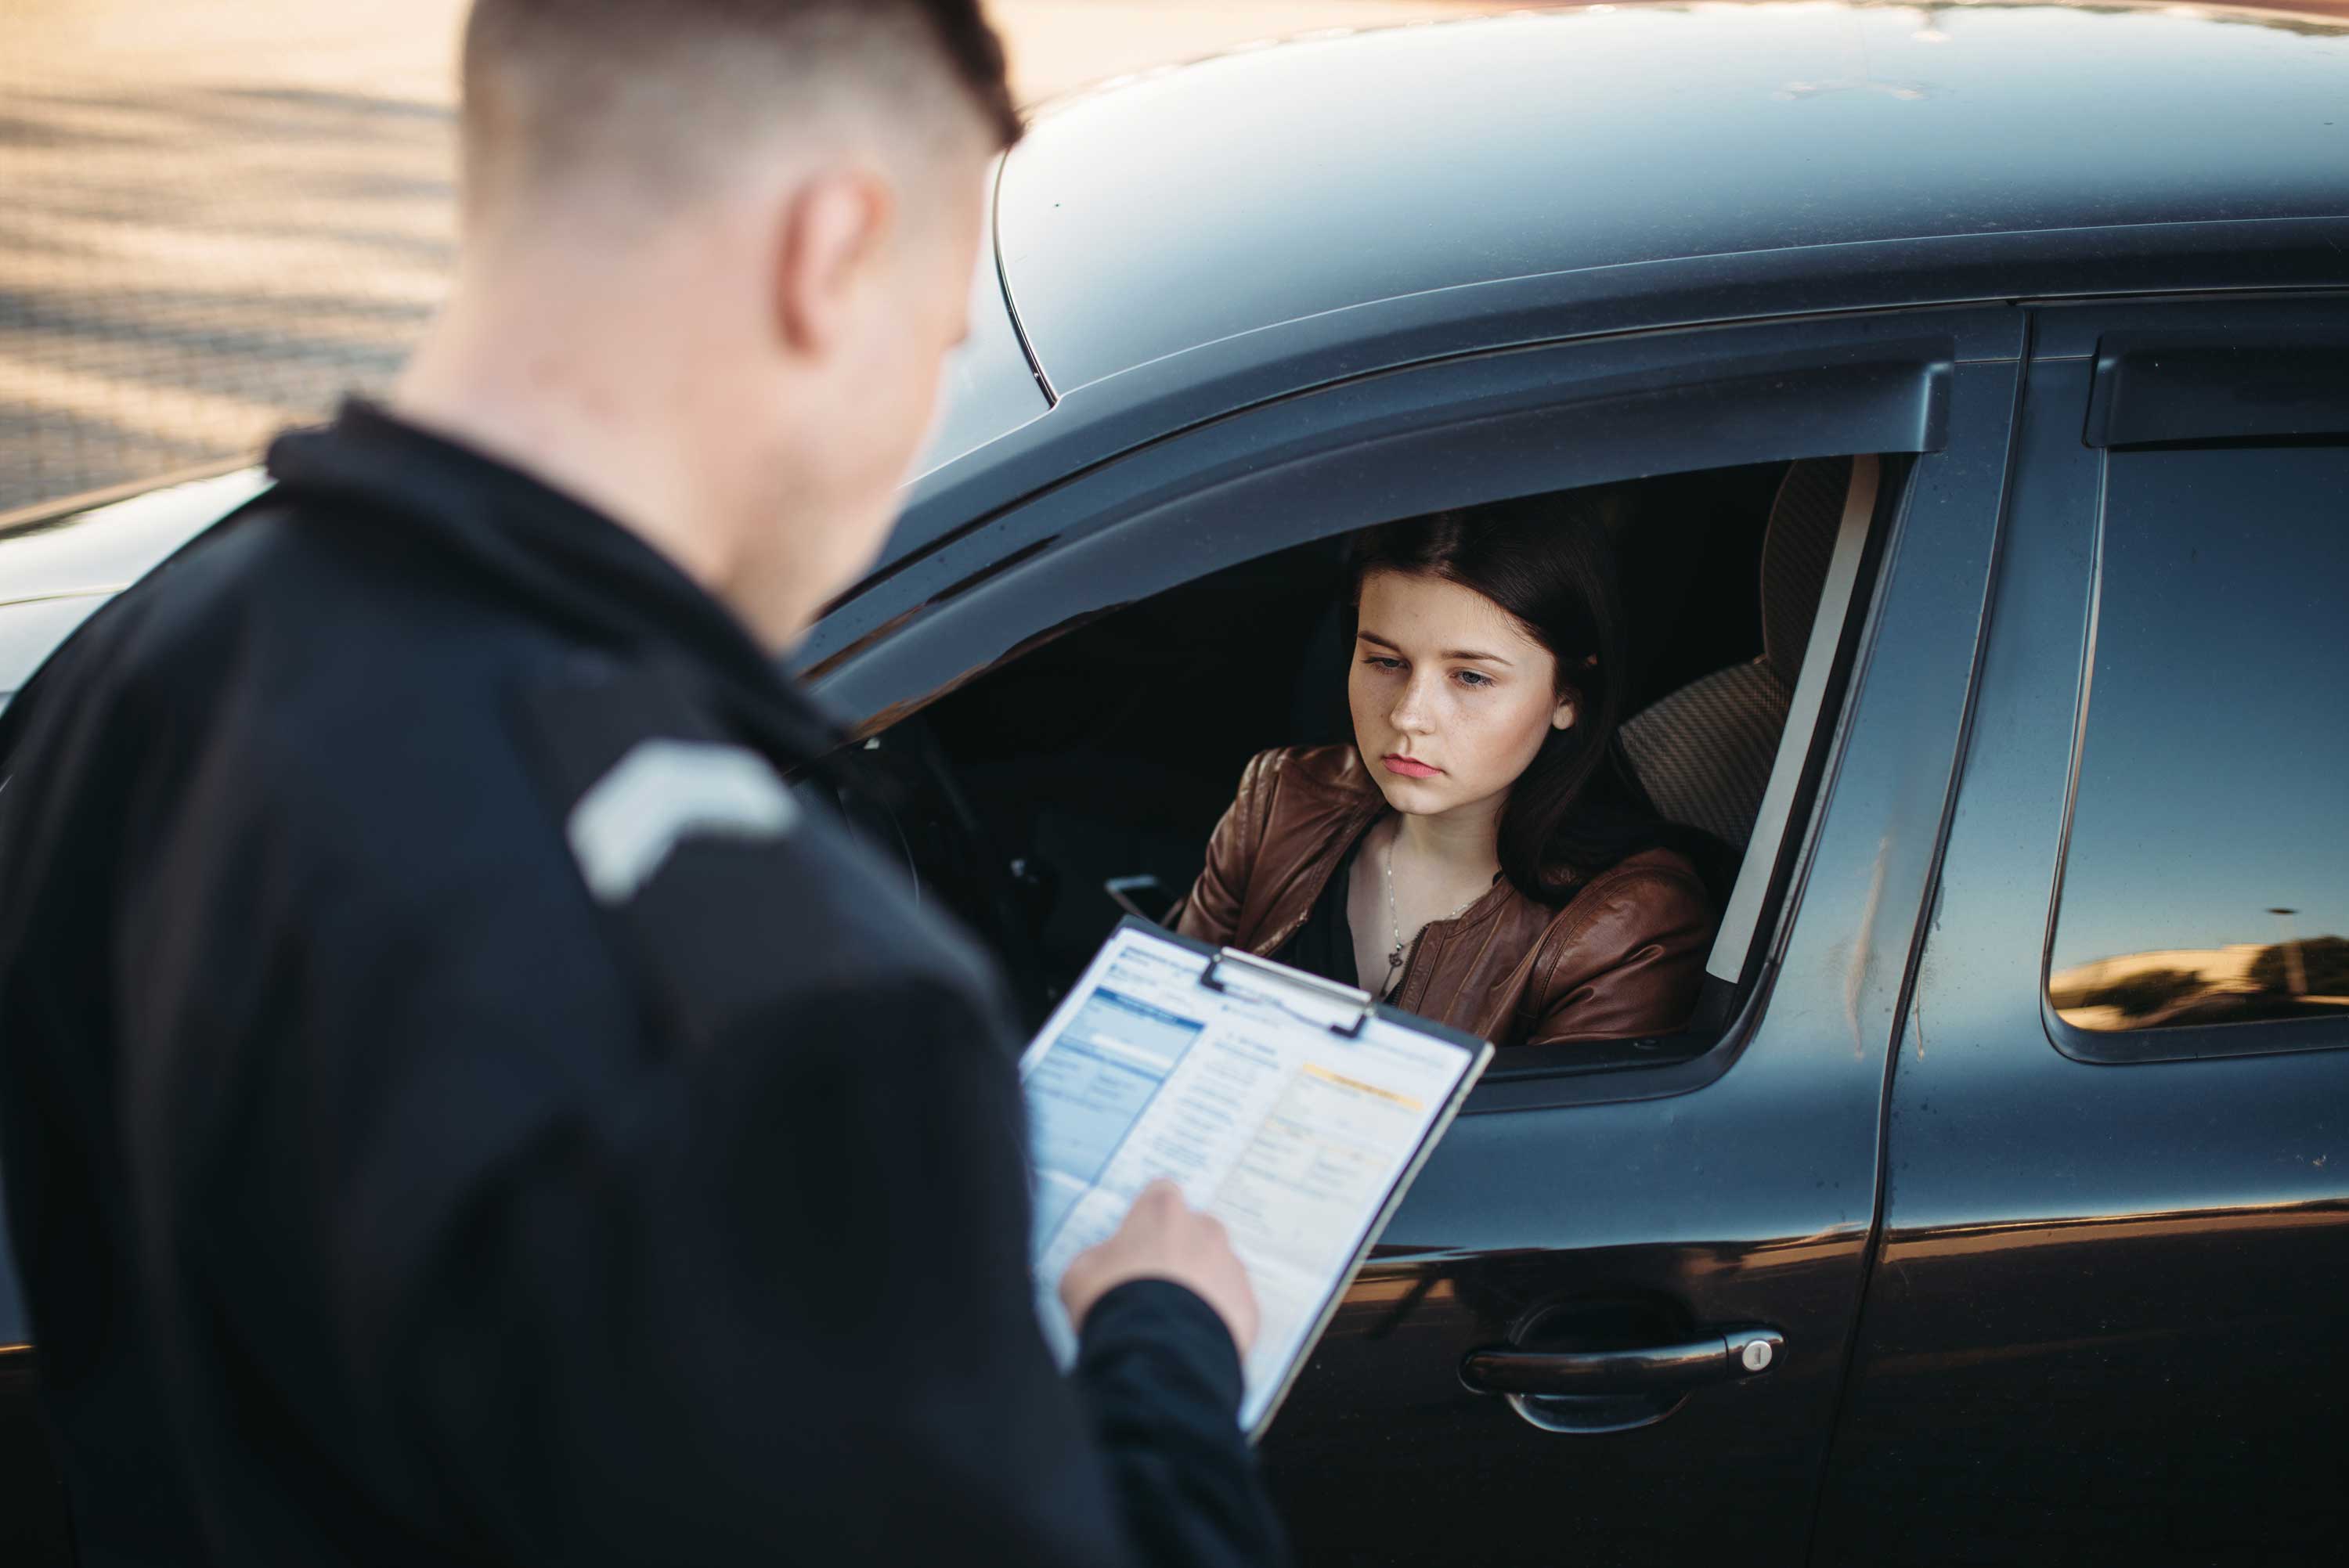 Rhode Island: Fight Back: Beating a traffic ticket starts as soon as you are pulled over